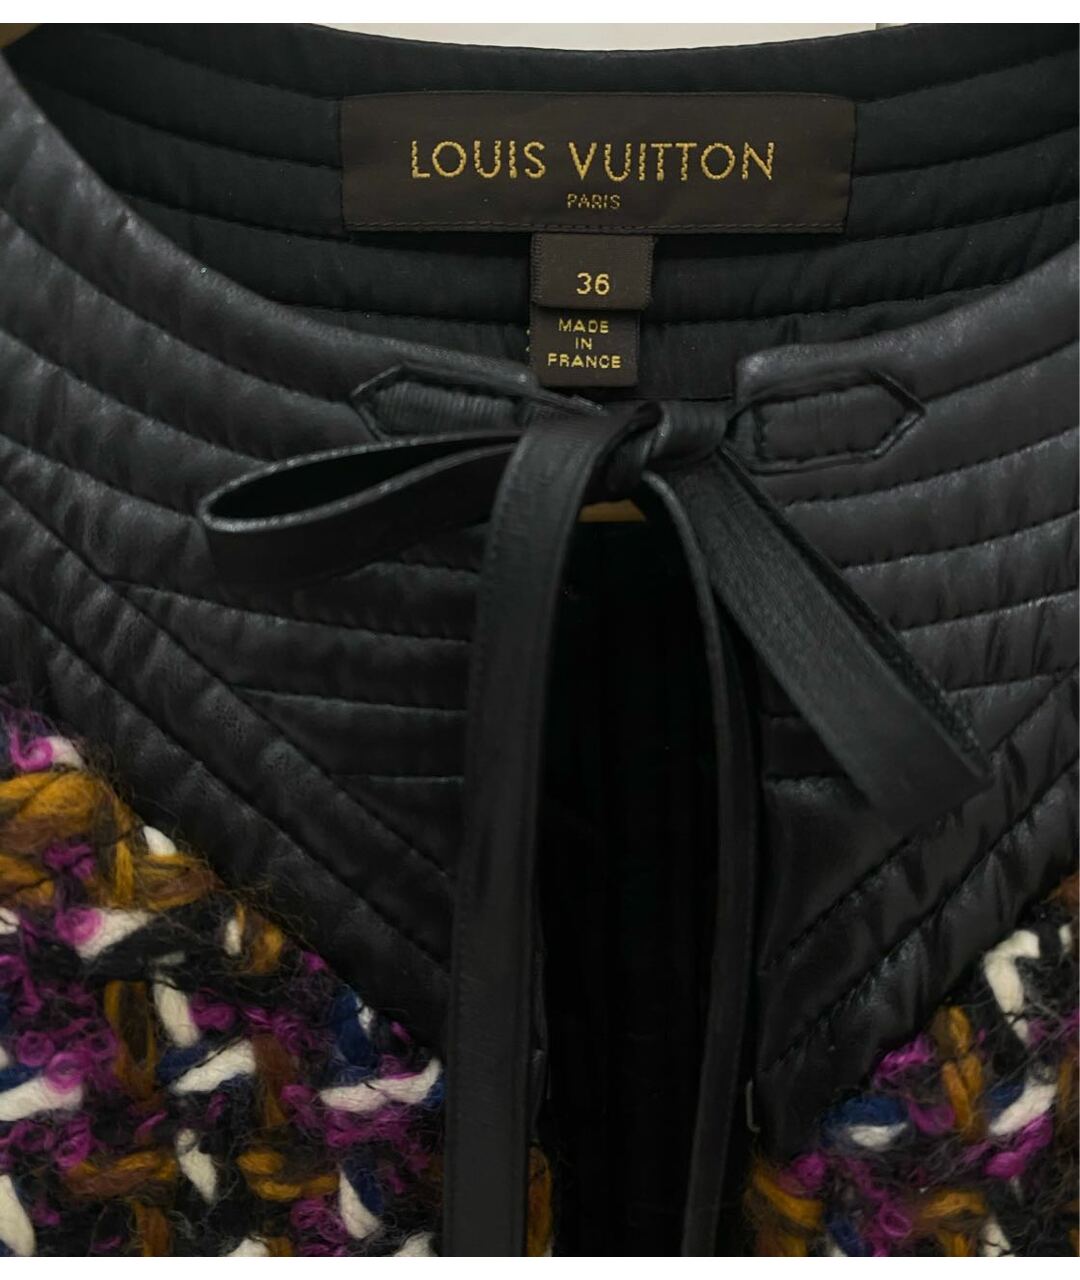 LOUIS VUITTON PRE-OWNED Мульти жакет/пиджак, фото 3